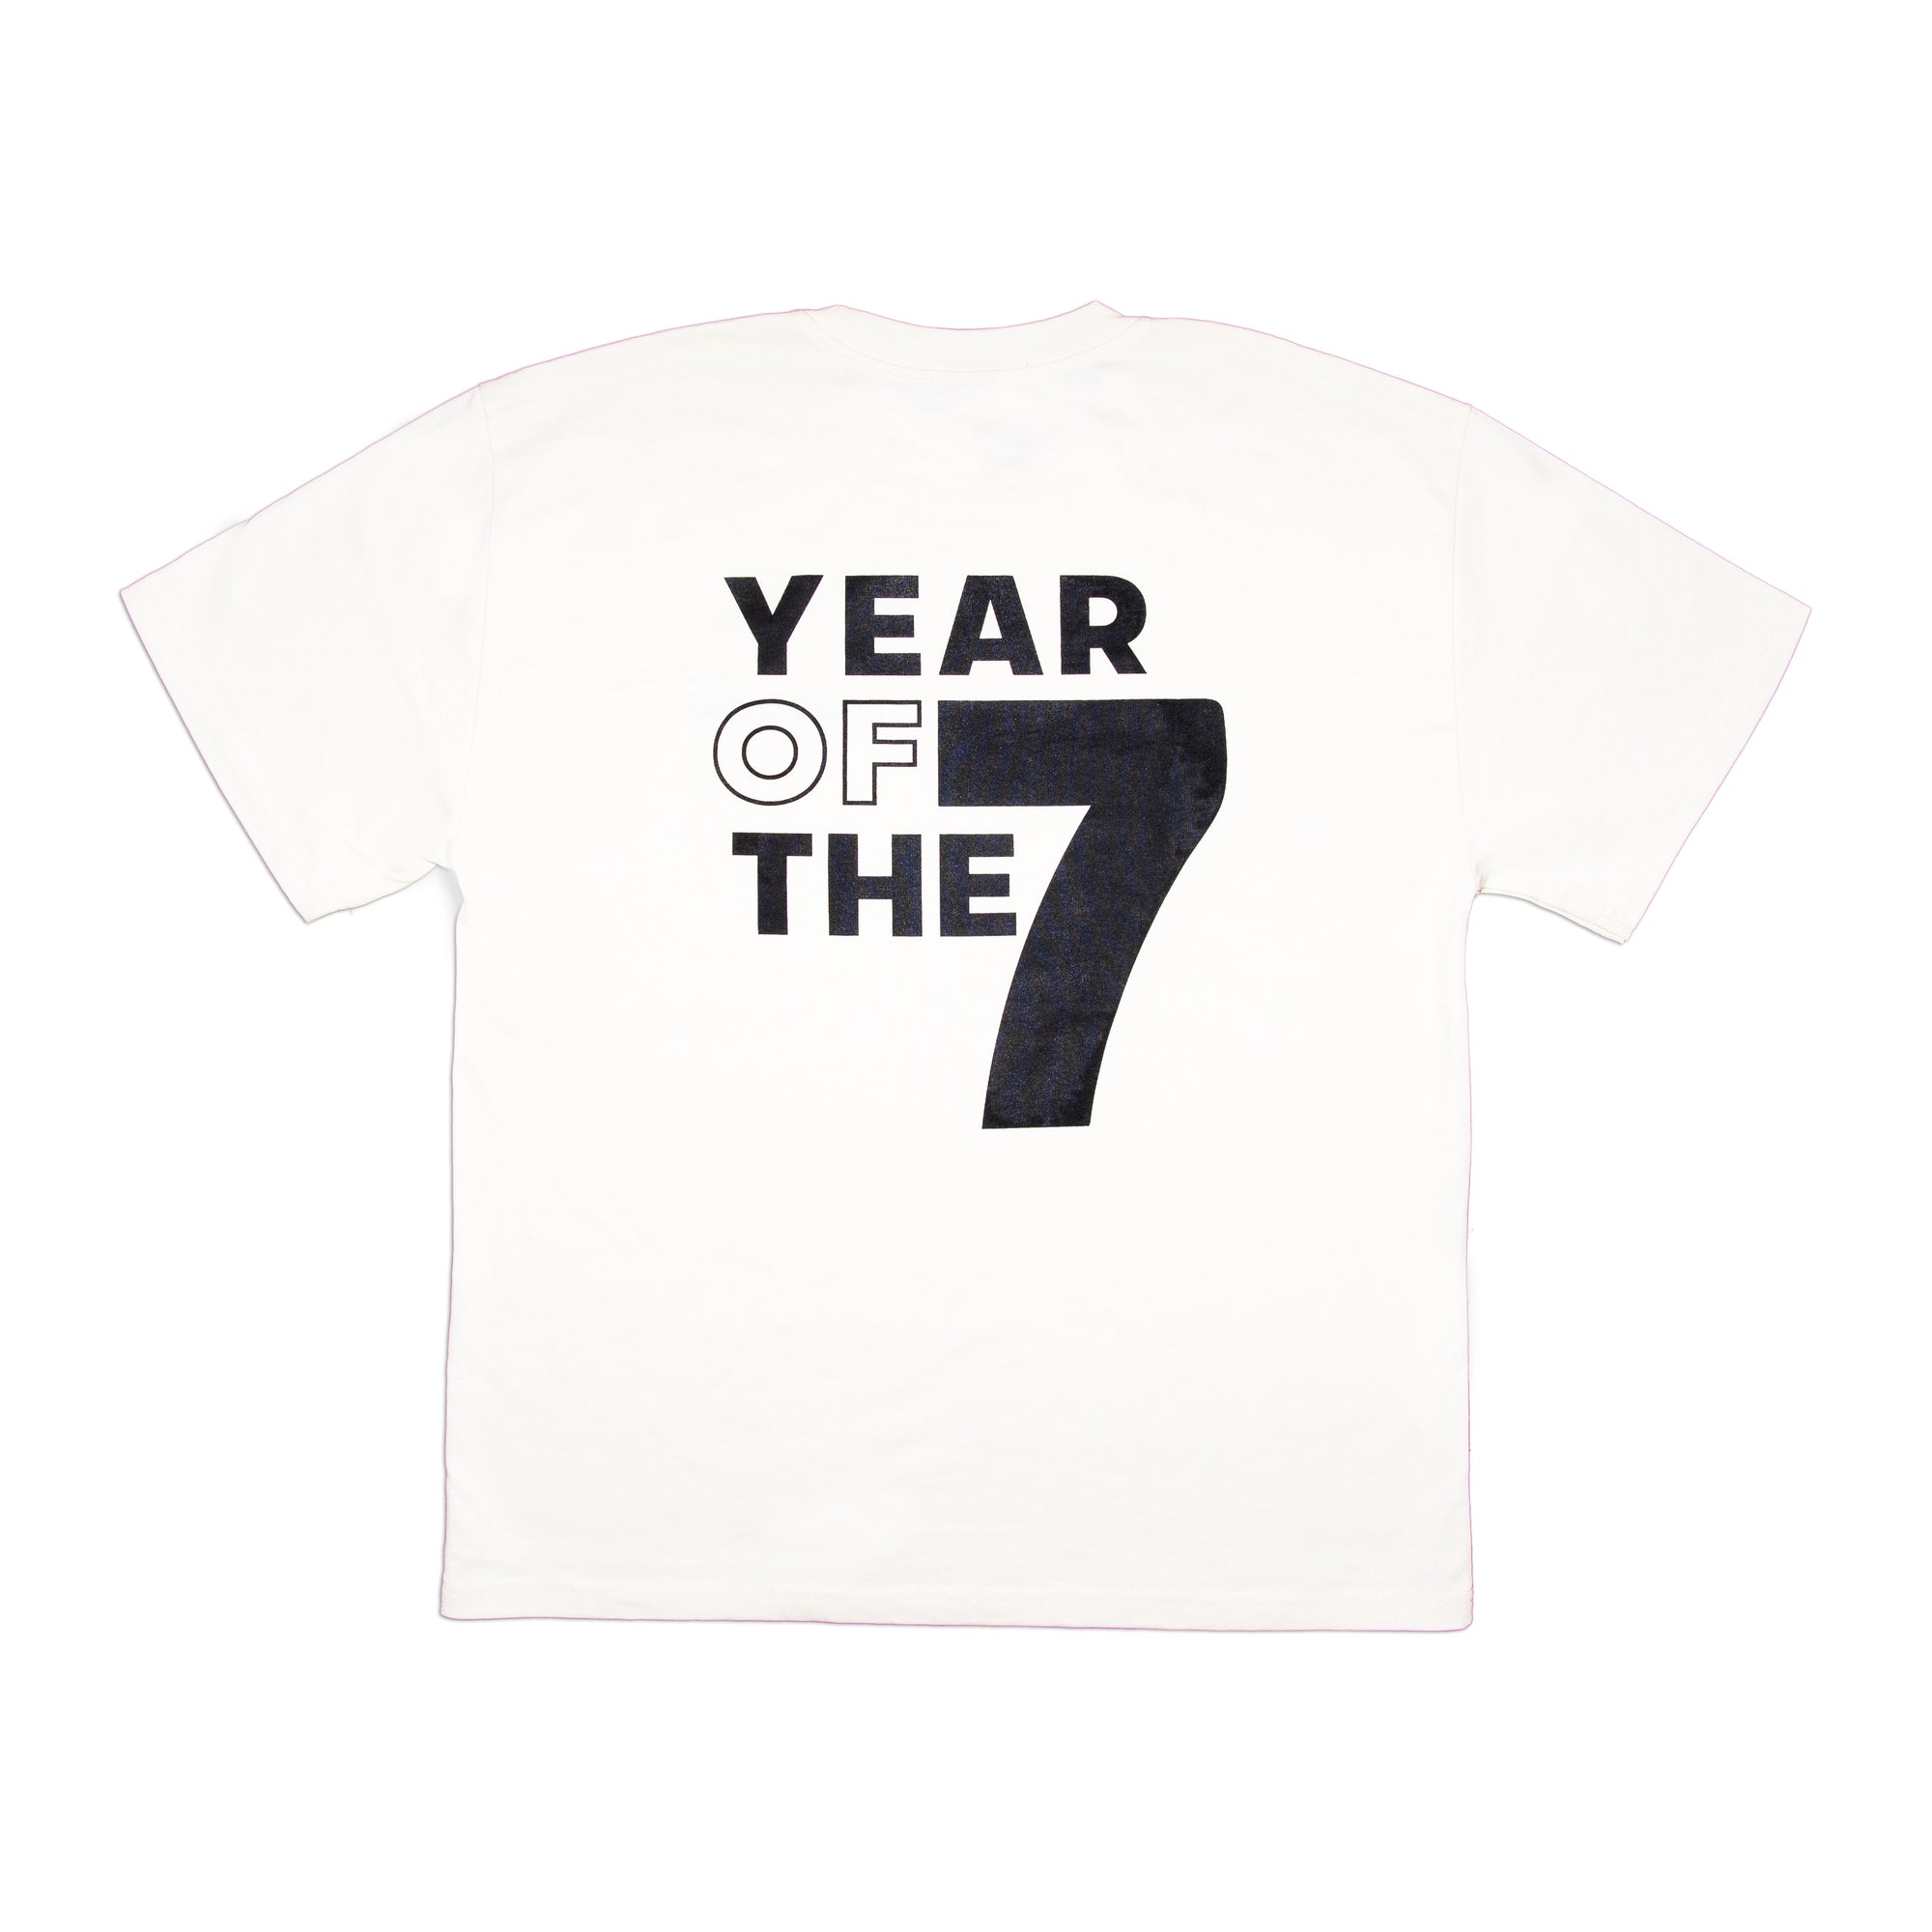 YEAR OF THE 7 T-SHIRT